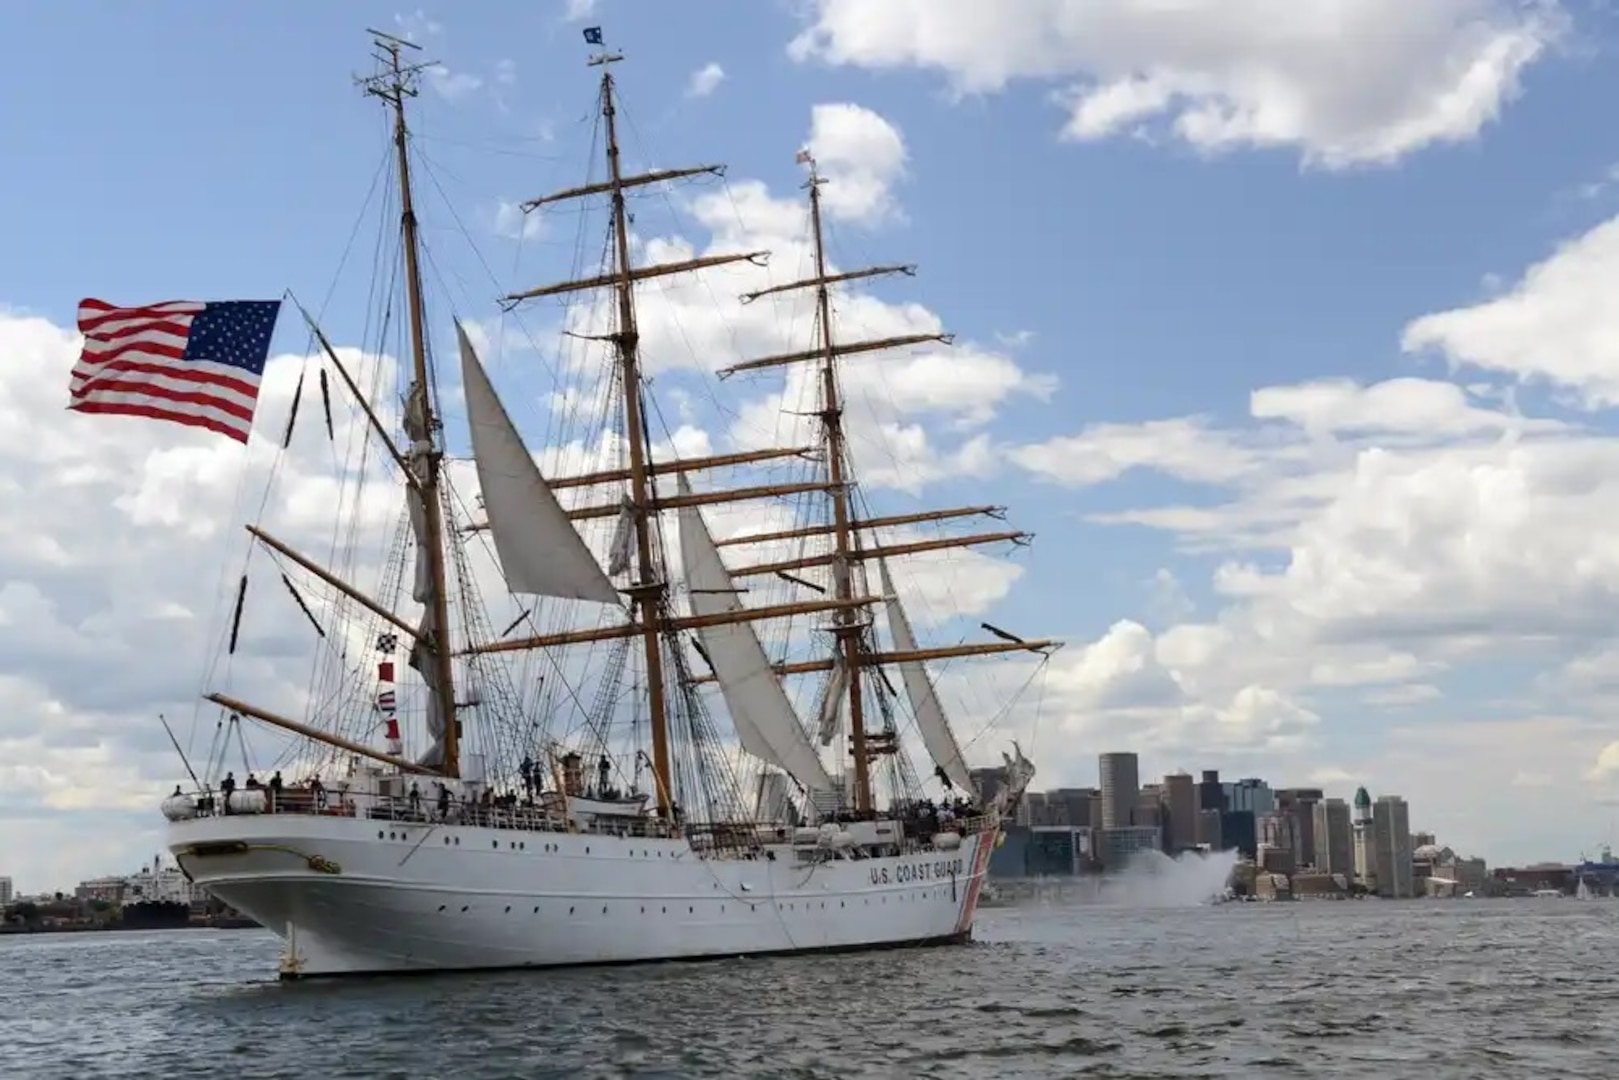 The Coast Guard Barque Eagle is in Boston Harbor, Thursday, July 23, 2015. The Eagle, operated by the pre-World War II German navy and taken as a war reparation by the U.S., is now a training ship where cadets and officer candidates learn leadership and practical seamanship skills. (U.S. photo by Petty Officer 2nd Class Cynthia Oldham)